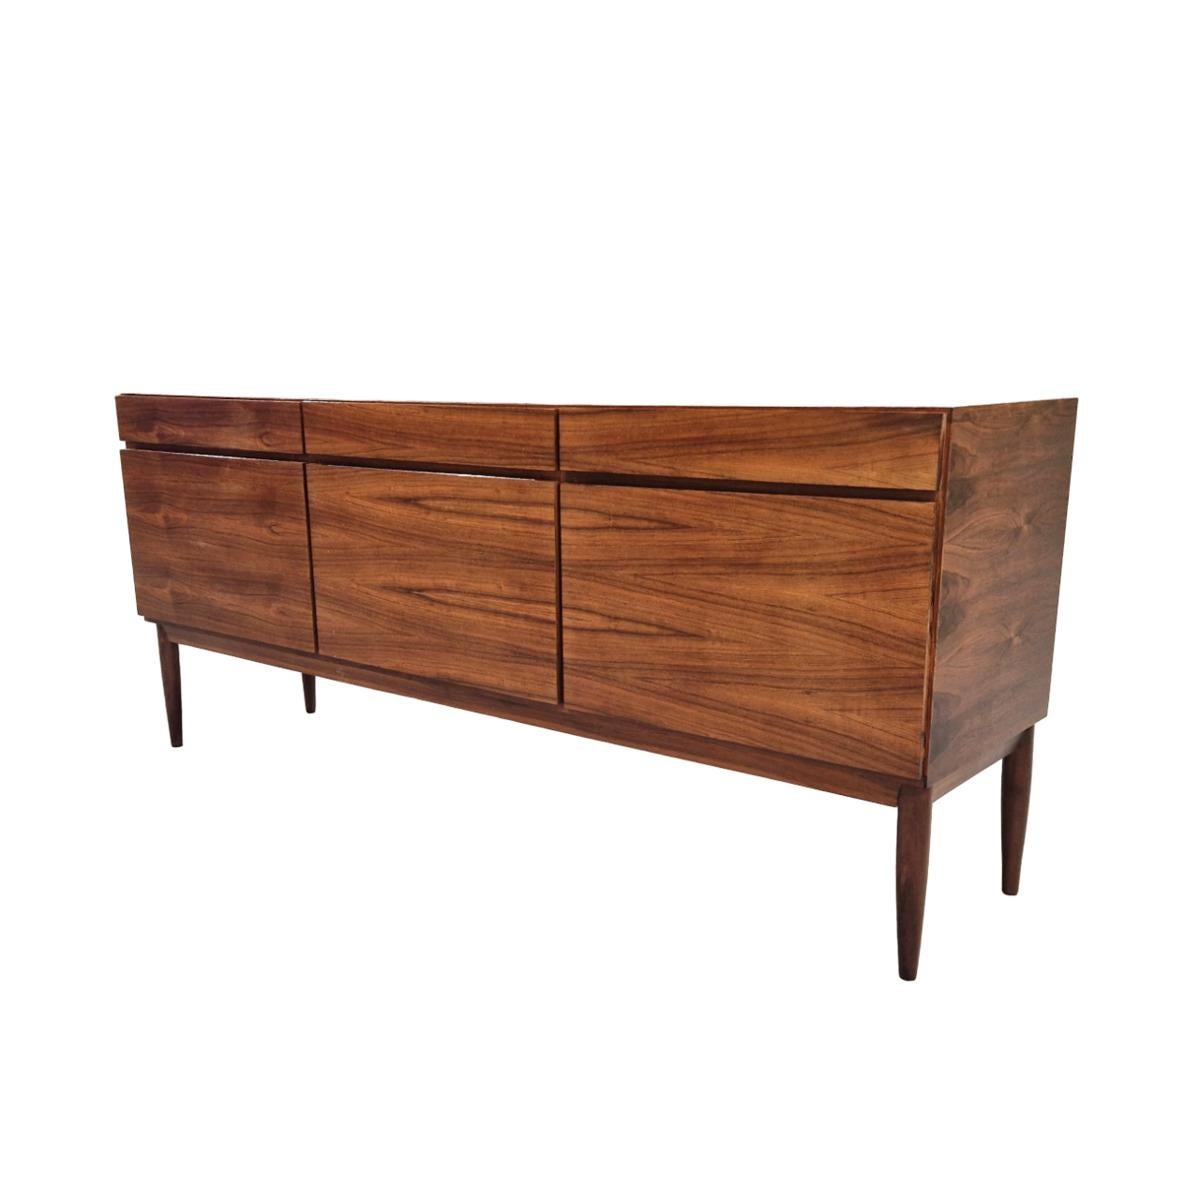 Superb Scandinavian sideboard  by the famous Danish architect IB Kofod Larsen. This piece of furniture is a rare three-door interpretation of the large FA66 sideboard produced by Faarup Möbelfabrik. The interior in light wood has a series of drawers